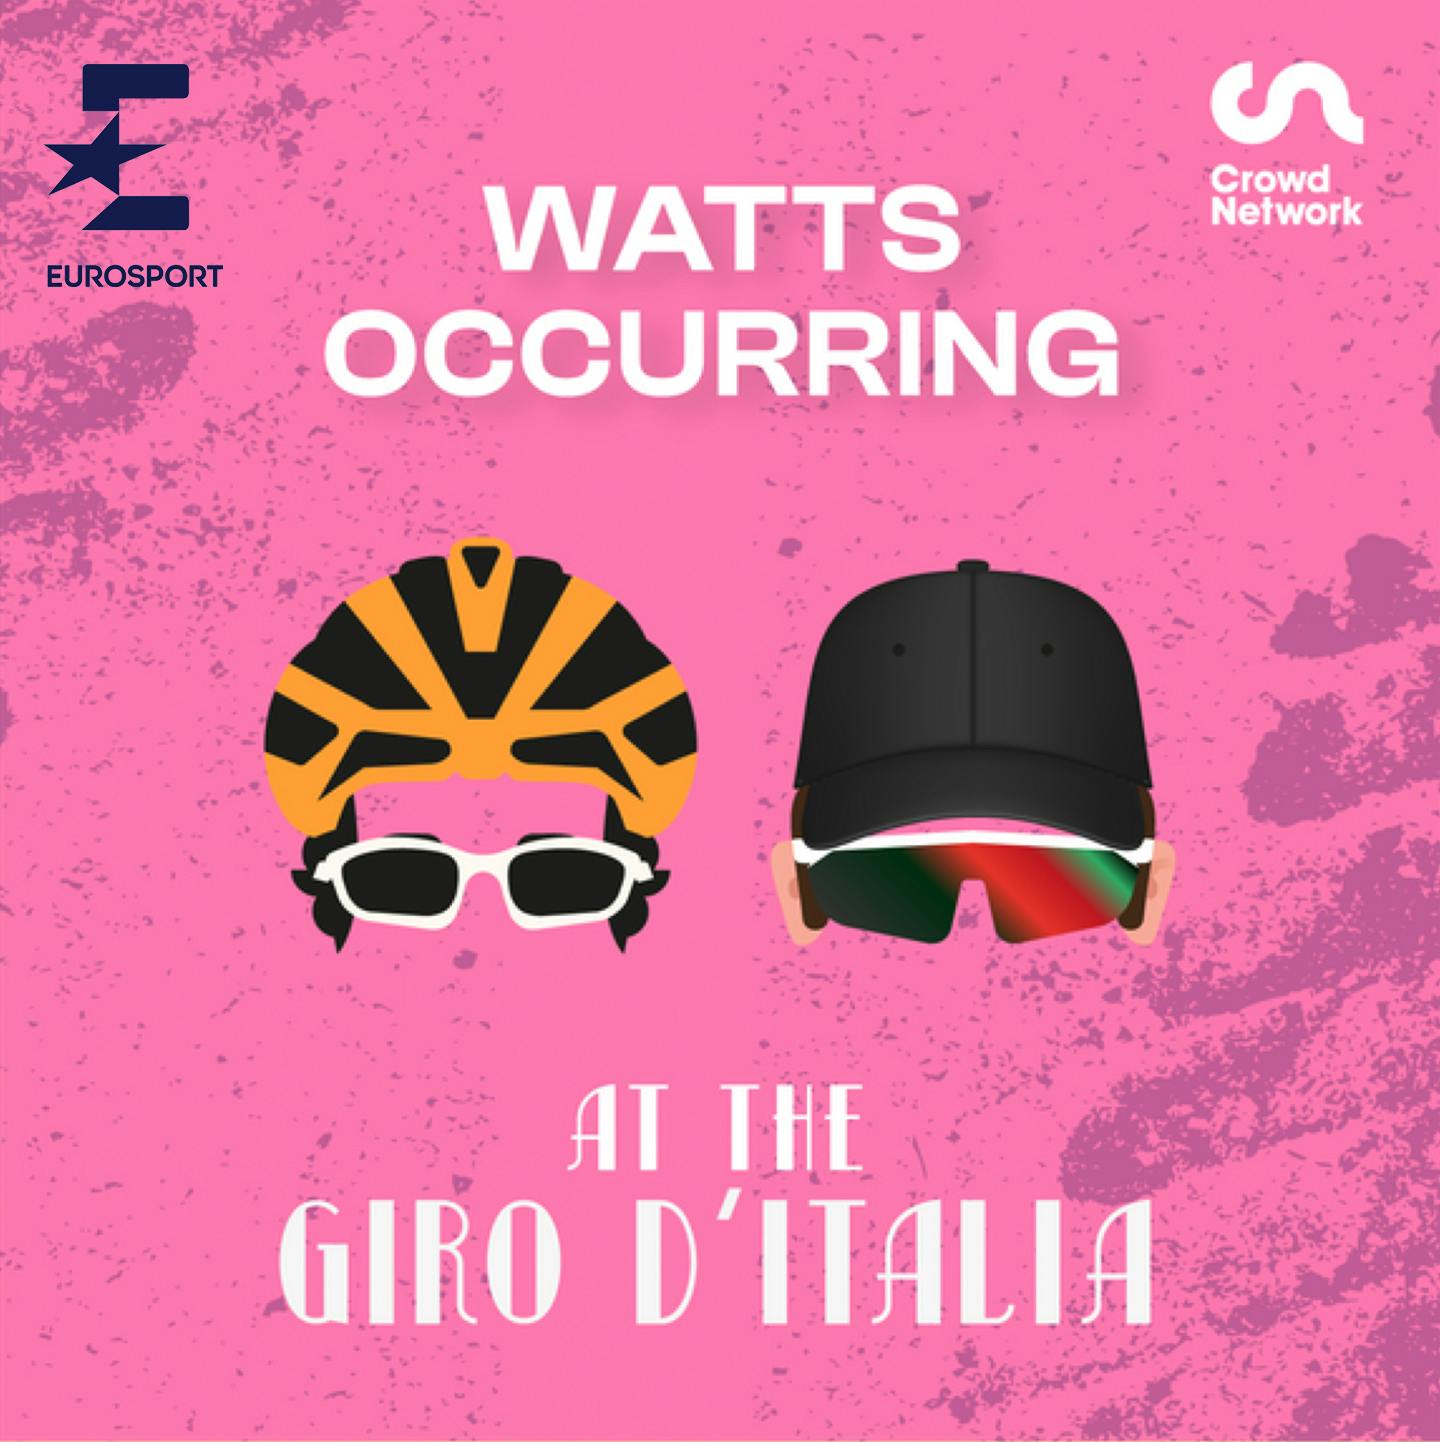 G's rest day recap | What a week at the Giro! - Watts Occurring powered by Eurosport